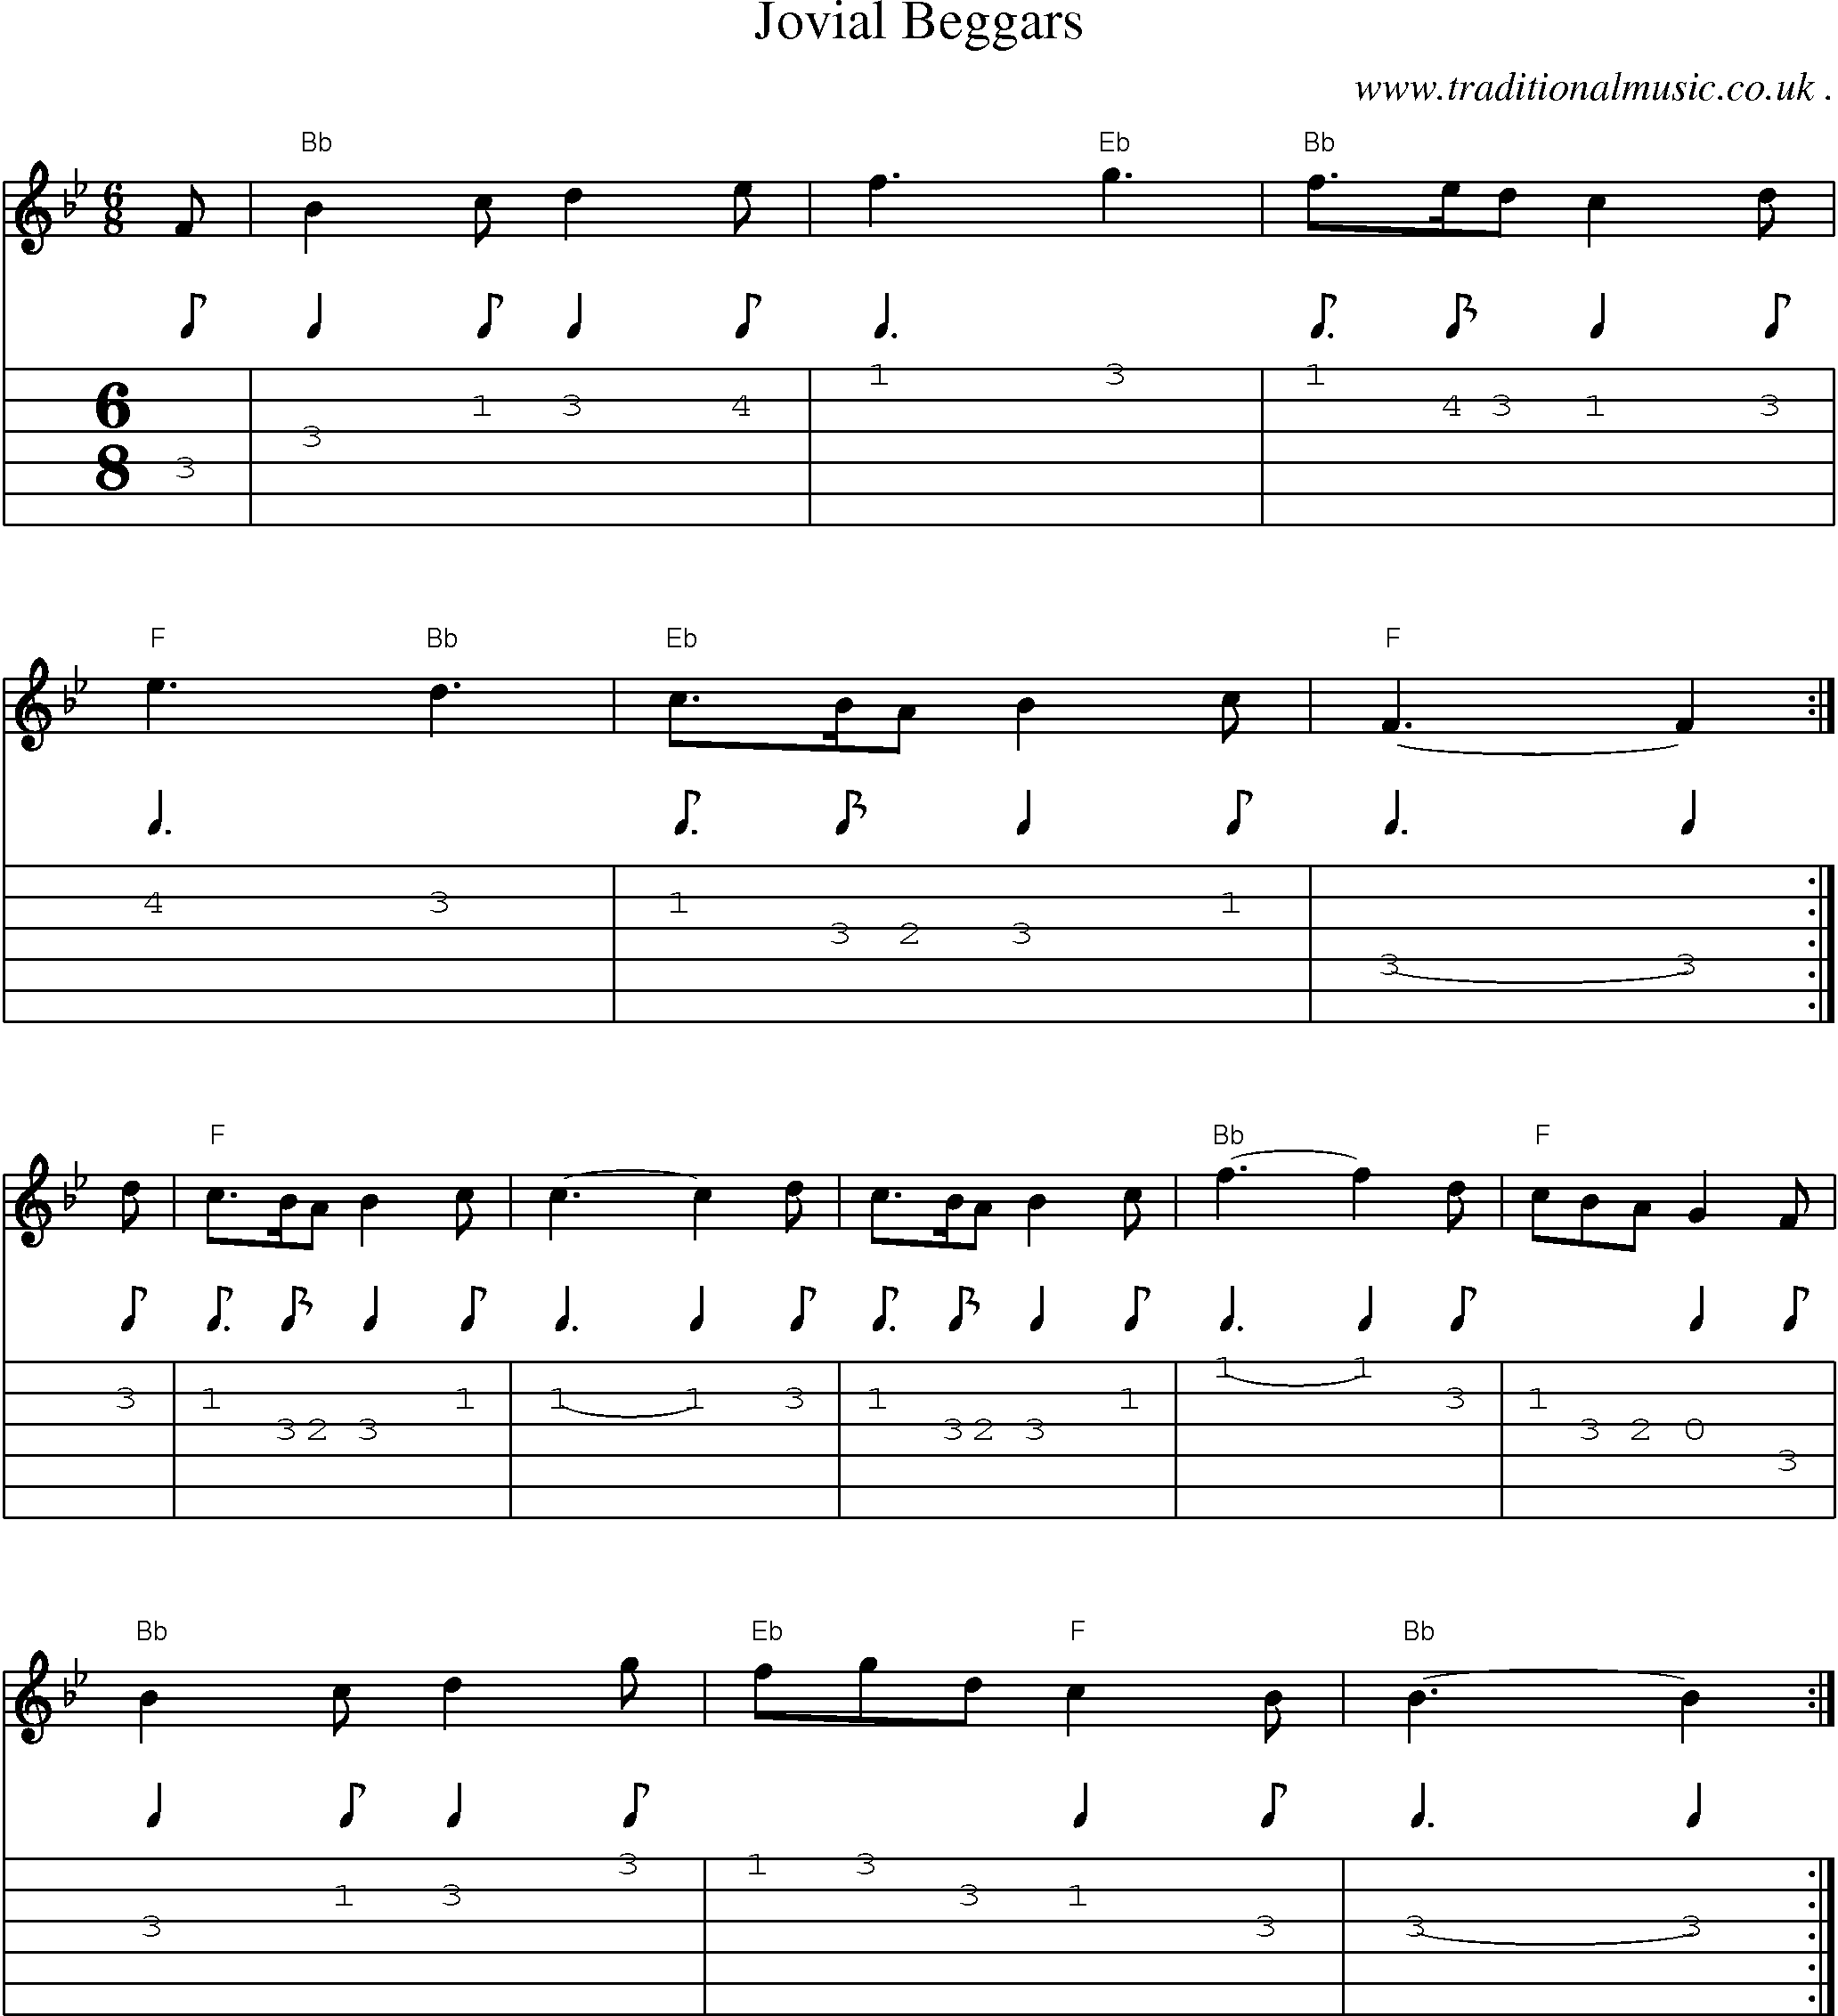 Sheet-Music and Guitar Tabs for Jovial Beggars